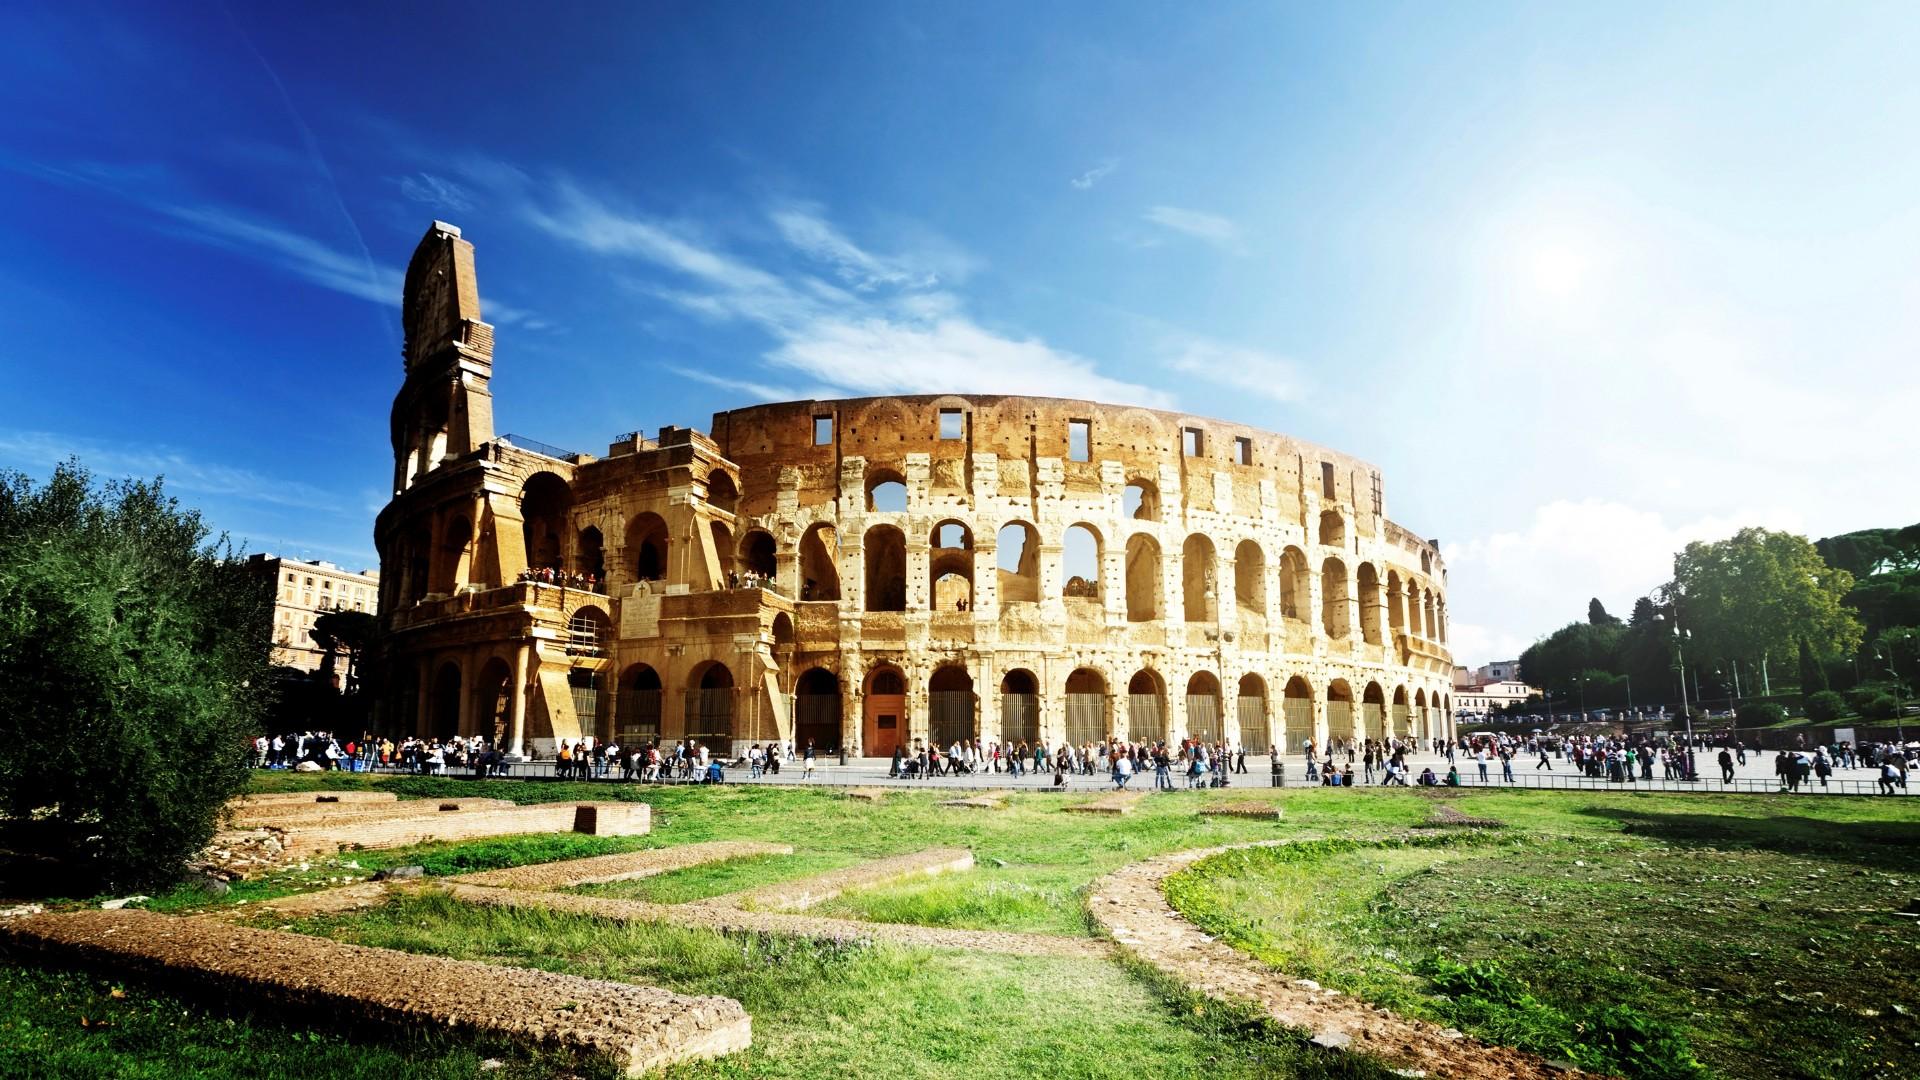 Hd Wallpaper Of The Colosseum In Rome Italy During Famous Places To Visit Wallpaper & Background Download